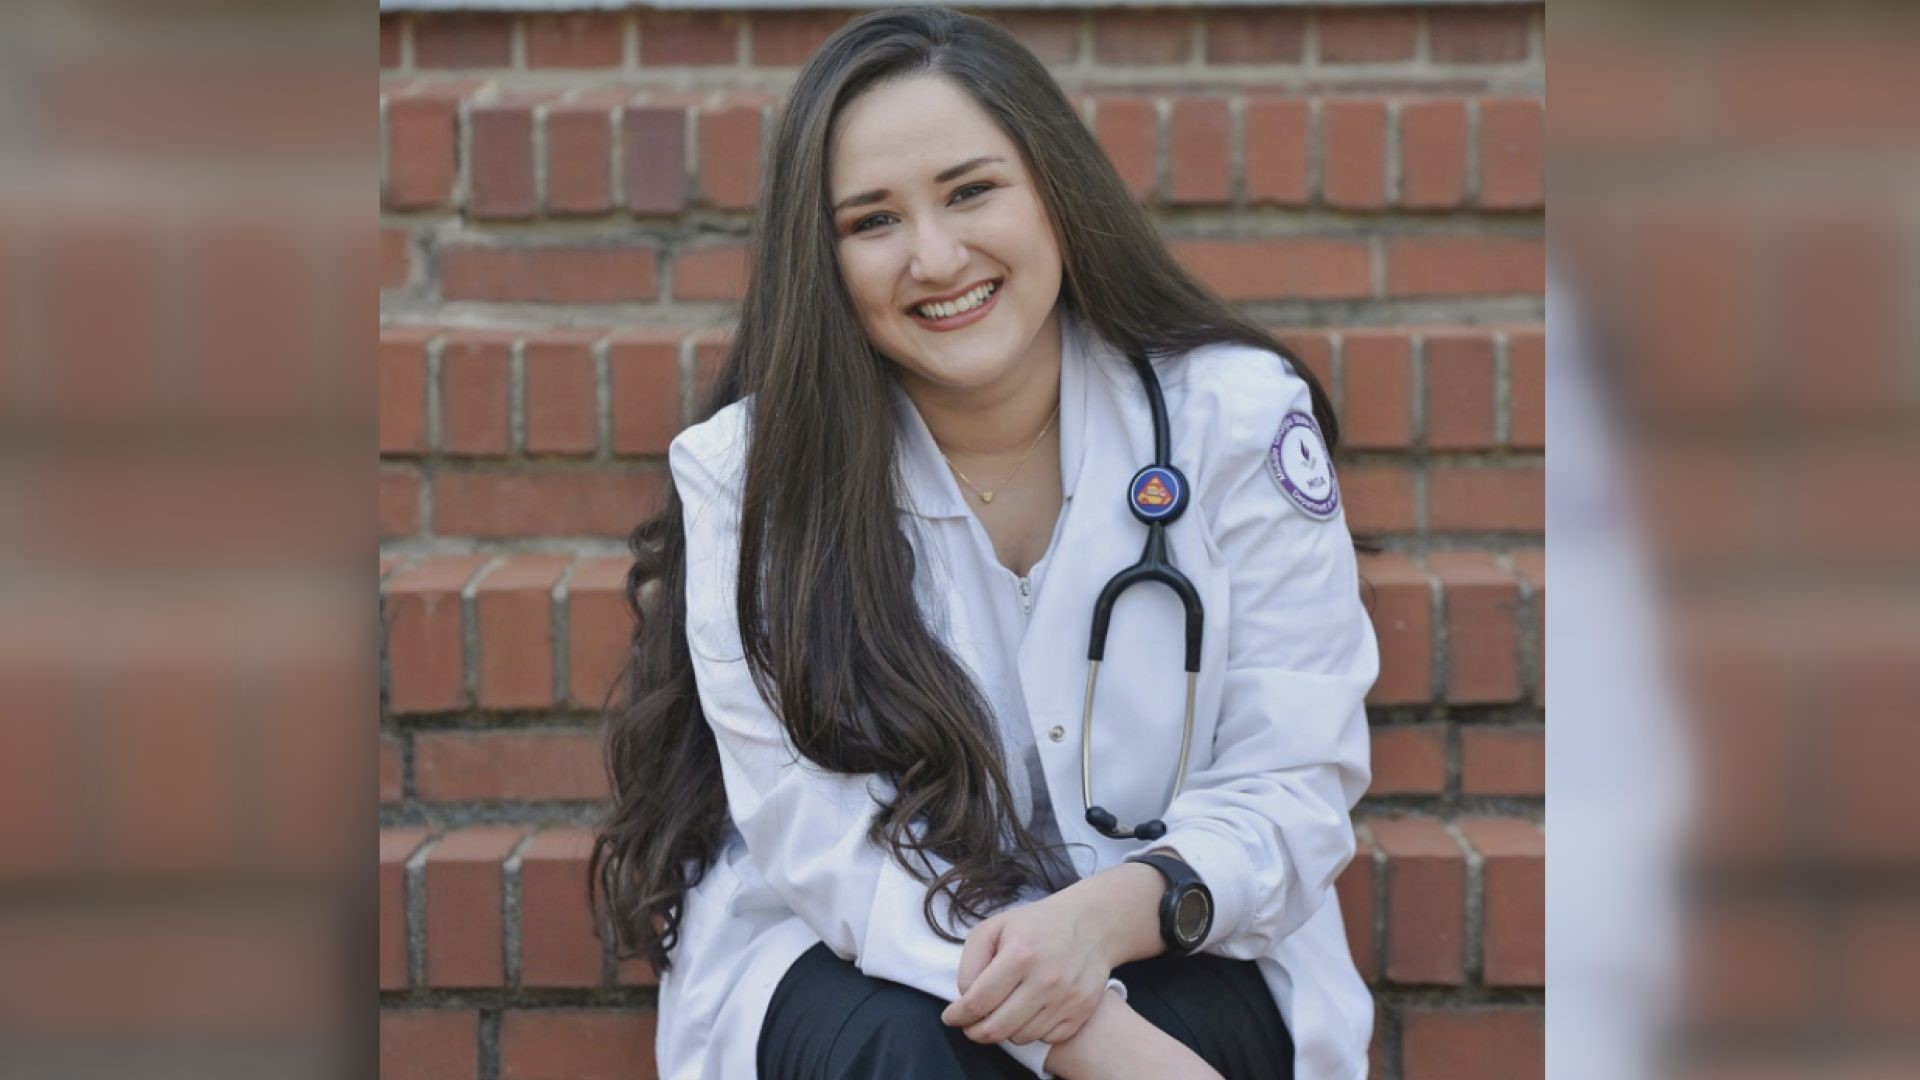 Gabriella Taunton-Carcamo left Honduras at 17-years-old speaking little to no English and worked her way to graduating with a nursing degree at Middle Georgia State.